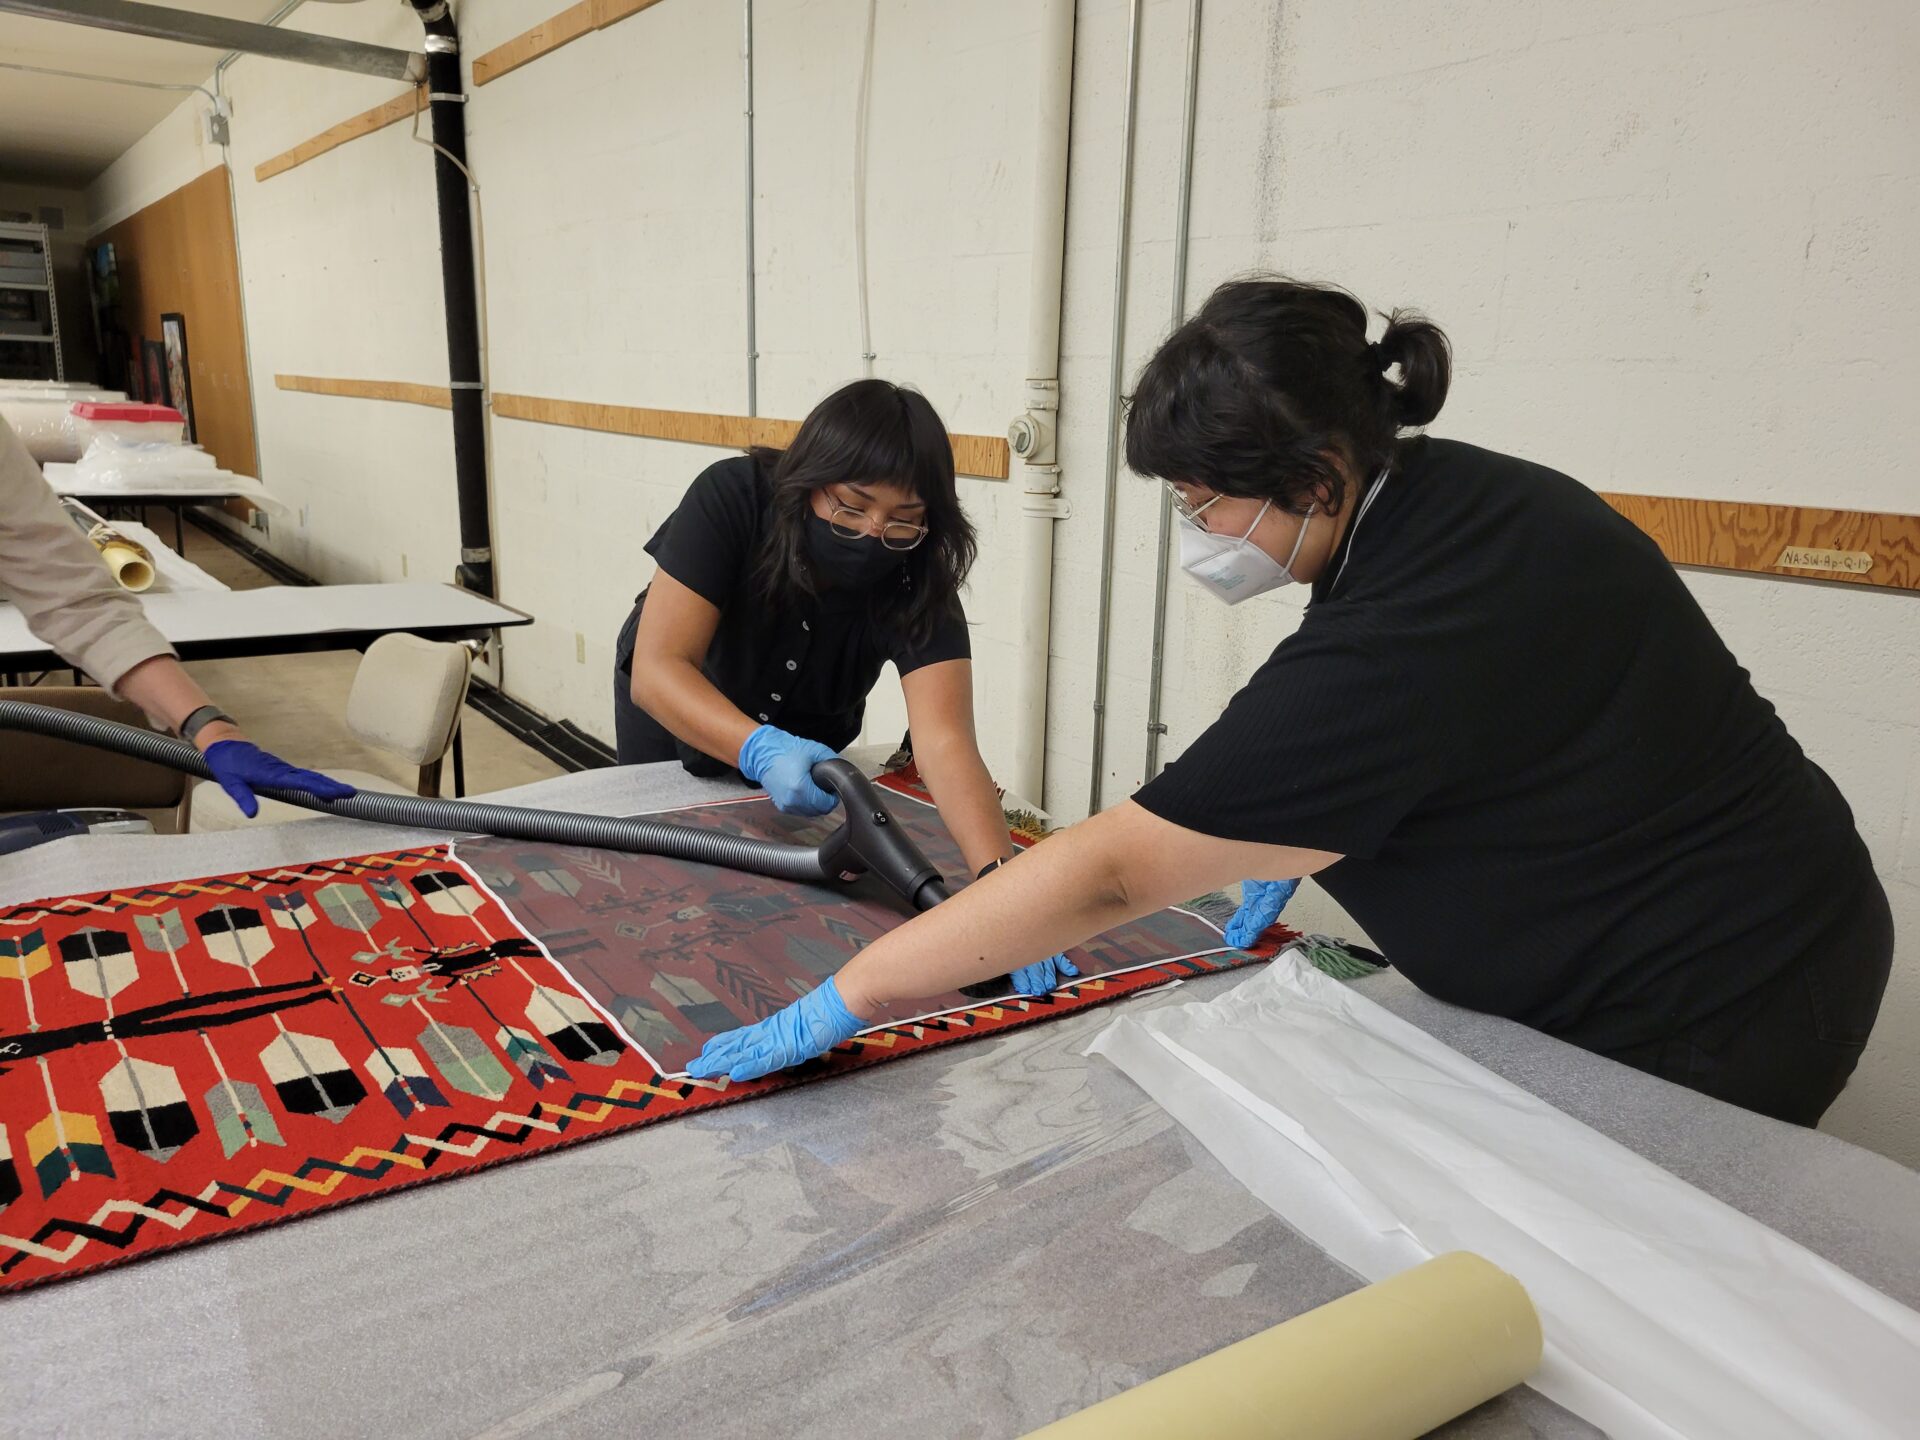 Two women wearing masks and gloves are cleaning a pictorial textile.